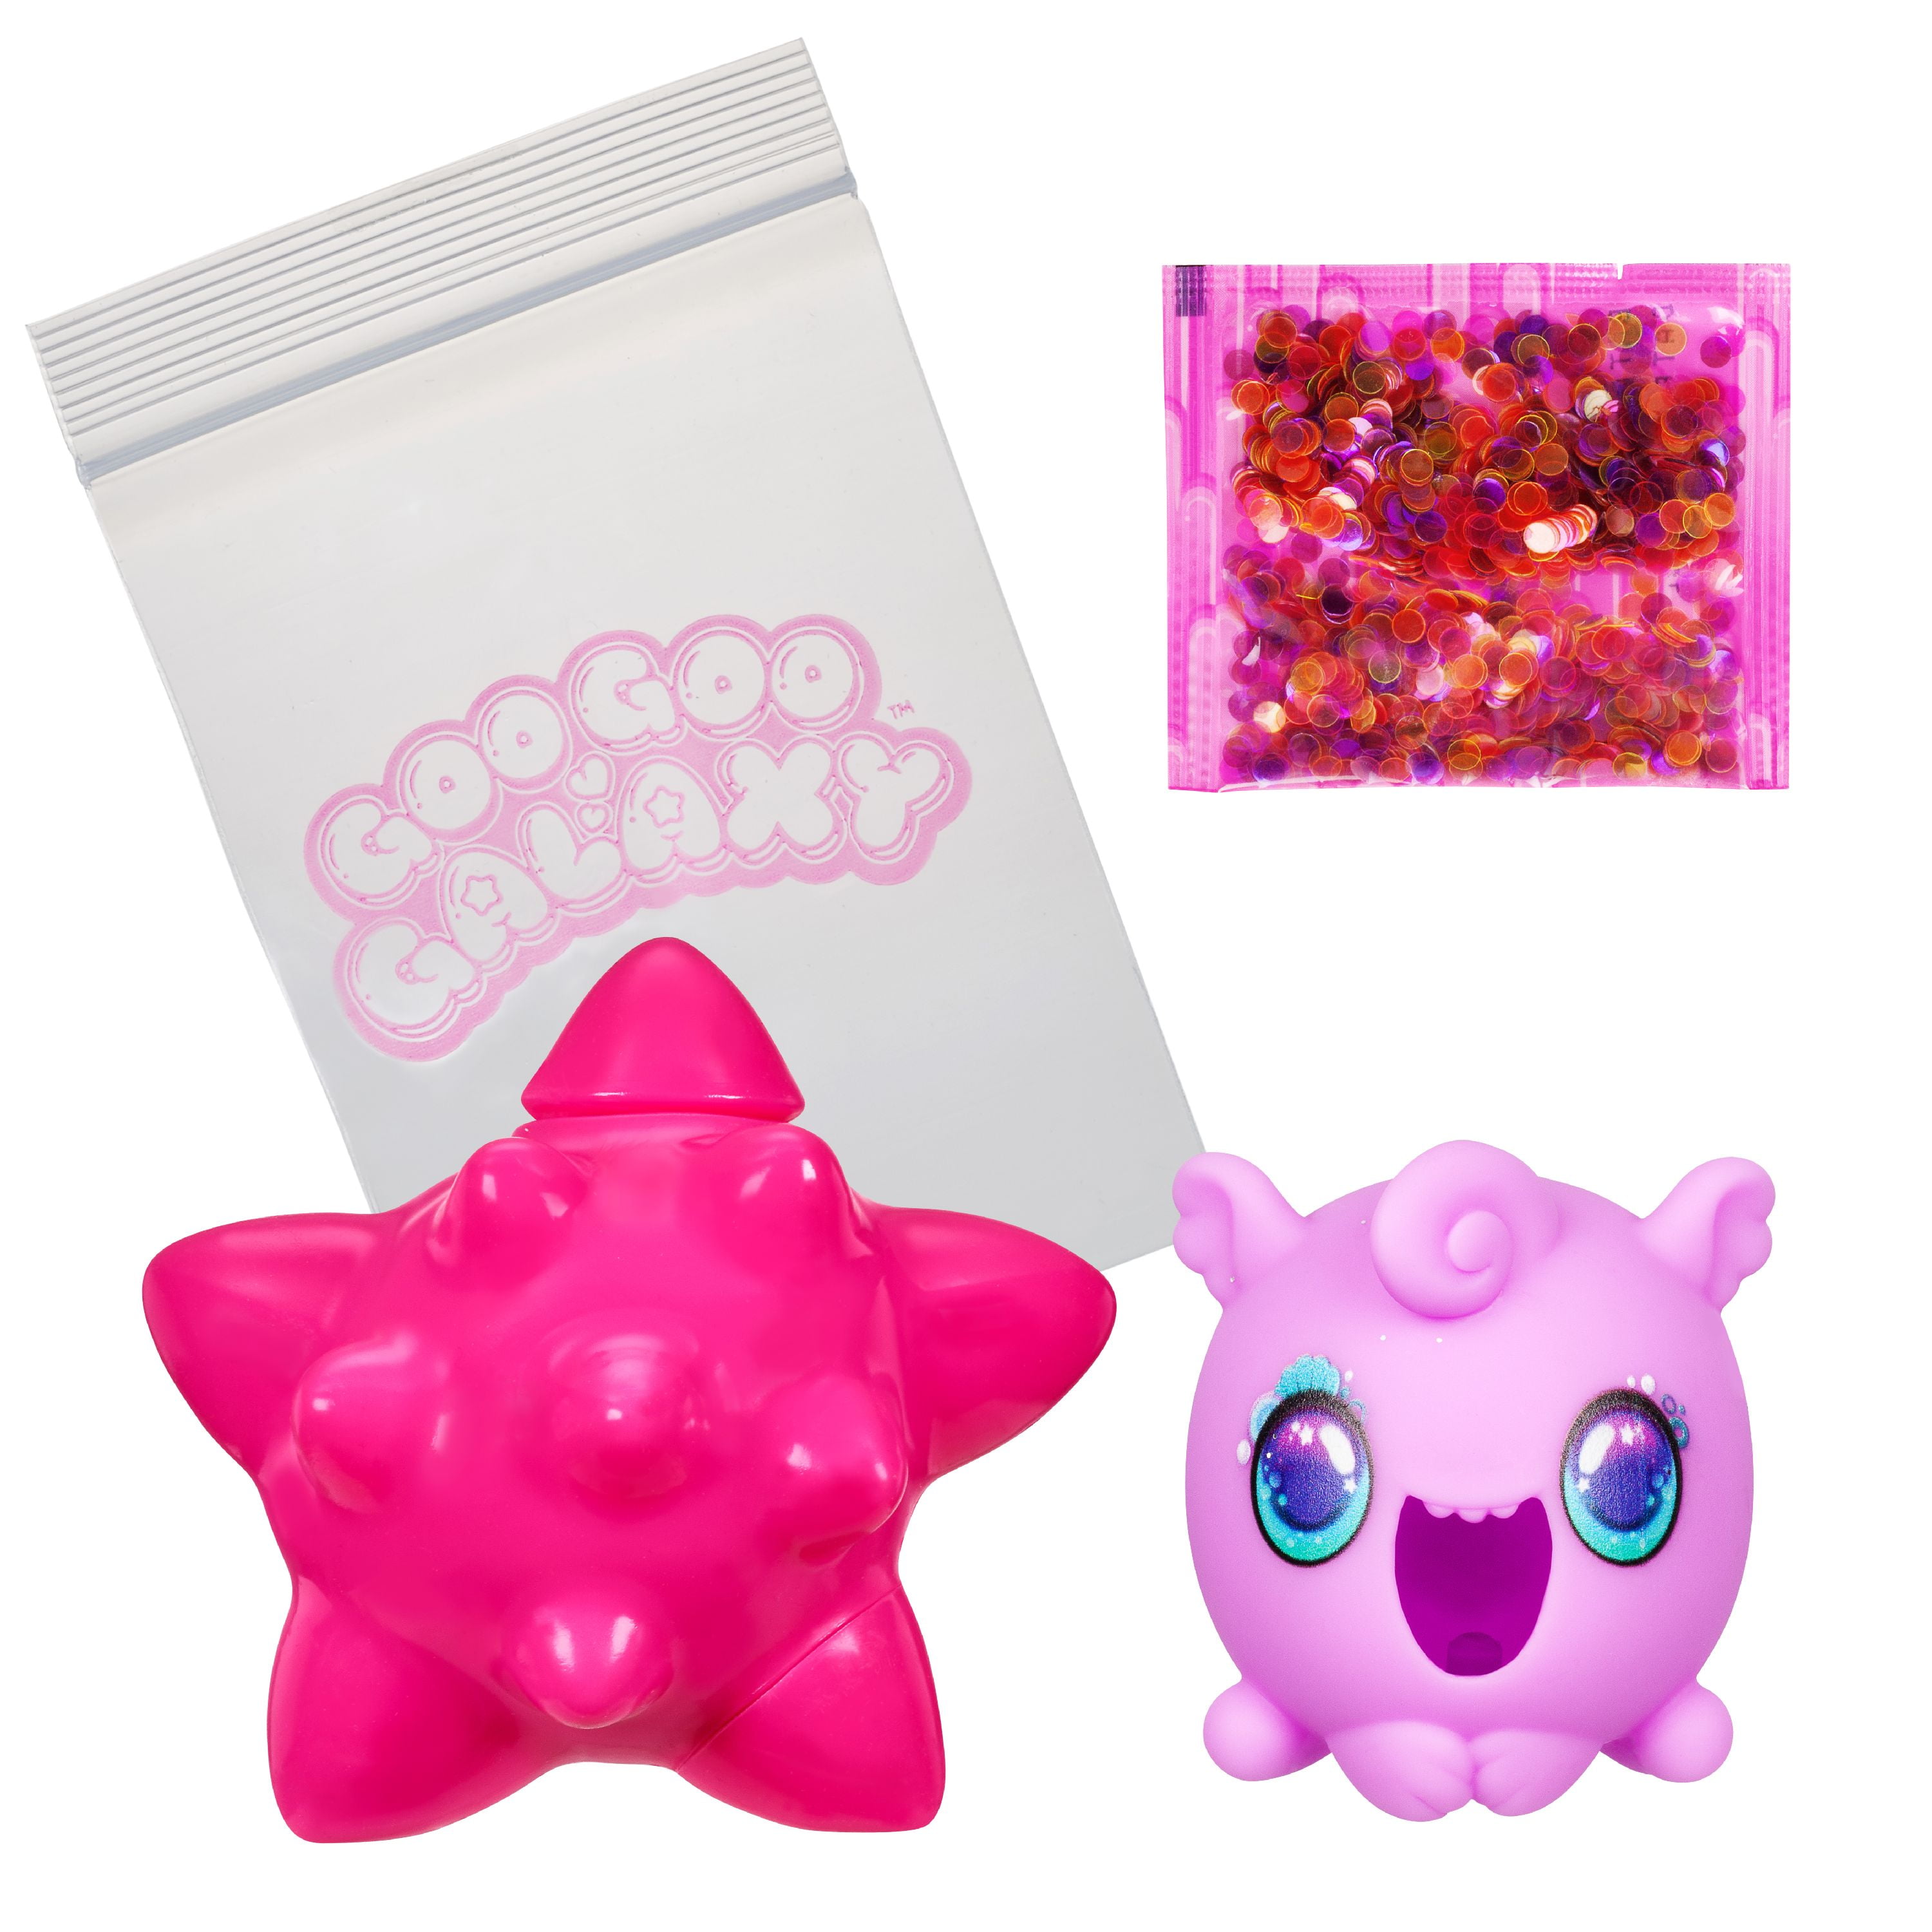 Fairy Glitter Putty Slime Goo Girls Magical Toy Gift With Figure Purple Pink 